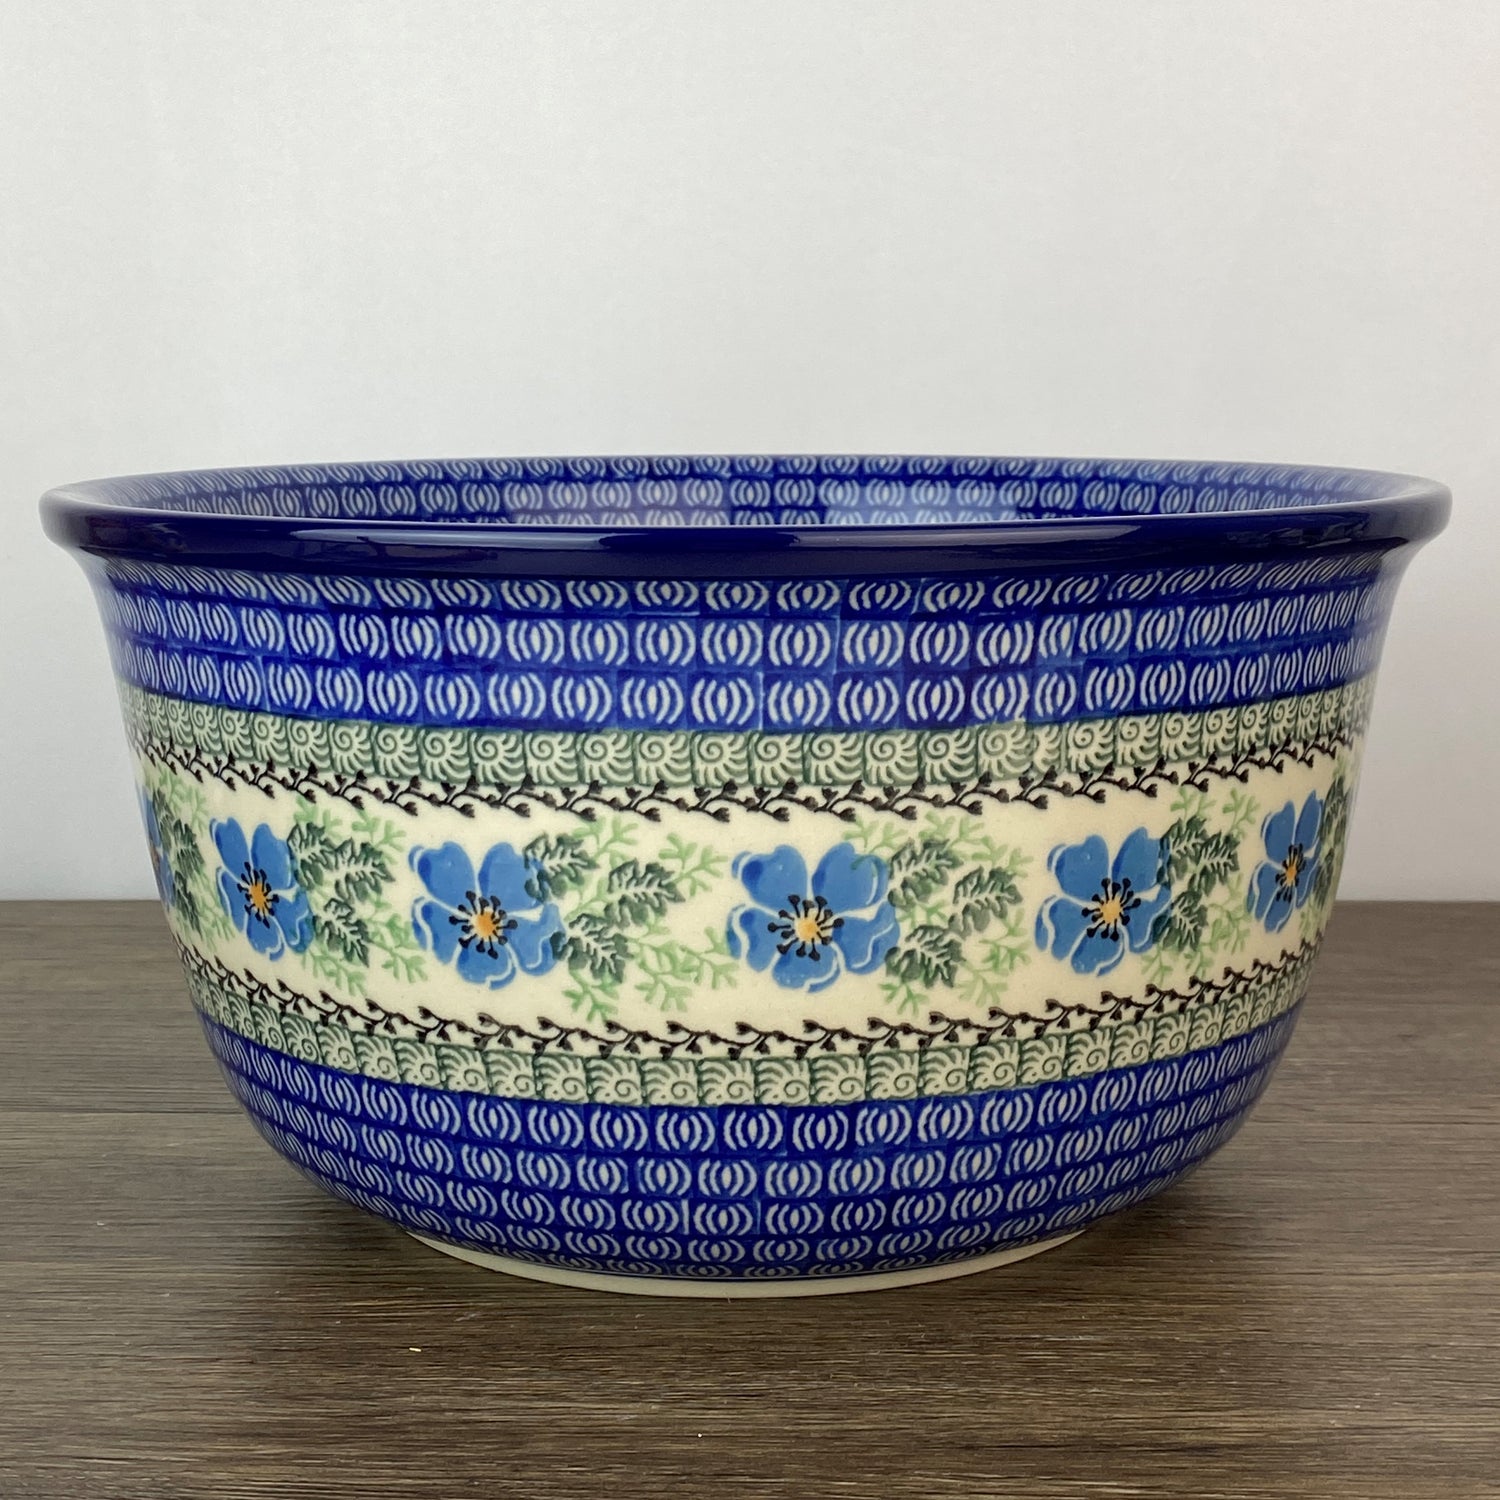 Bundt Cake Pan (Winter Skies)  AA55-2826X - The Polish Pottery Outlet